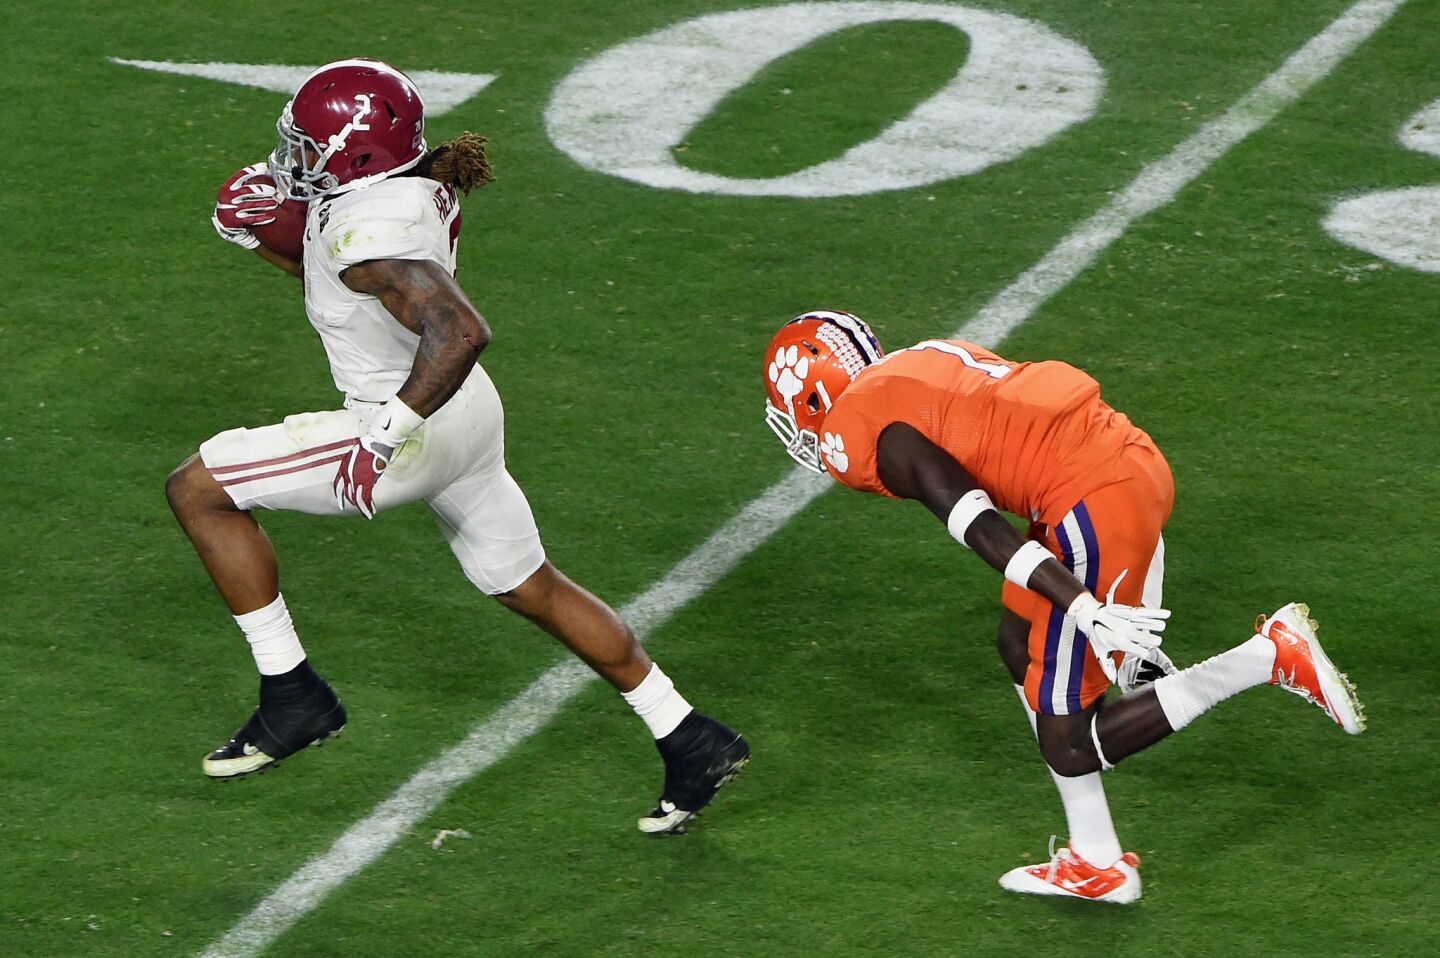 Alabama running back Derrick Henry runs for a 50-yard touchdown in the first quarter as Clemson safety Jayron Kearse can't make the tackle.